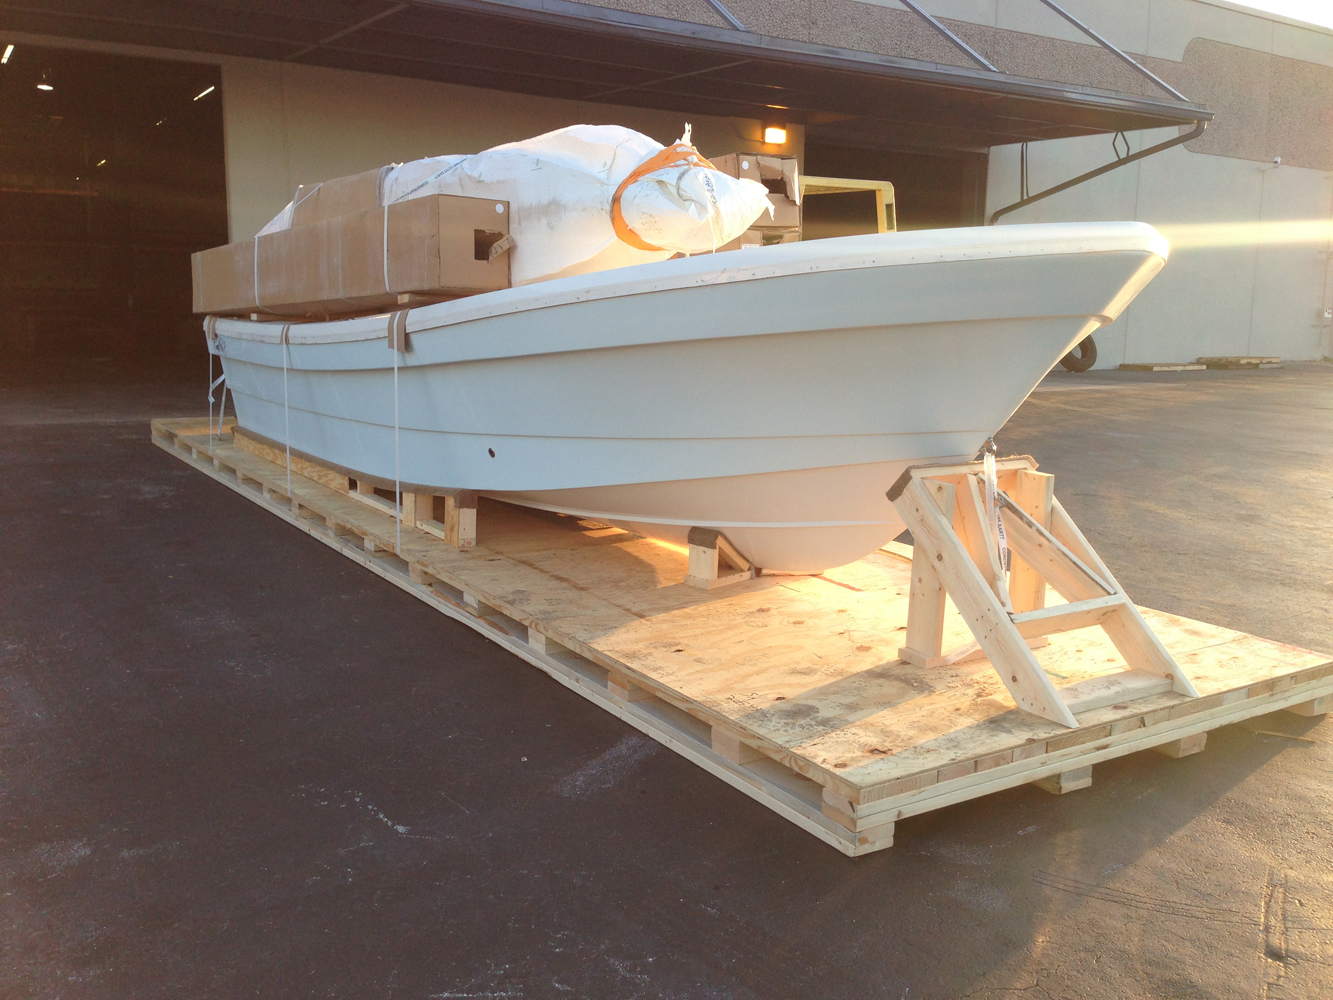 All American Crating | A Boat Preparing For Shipment